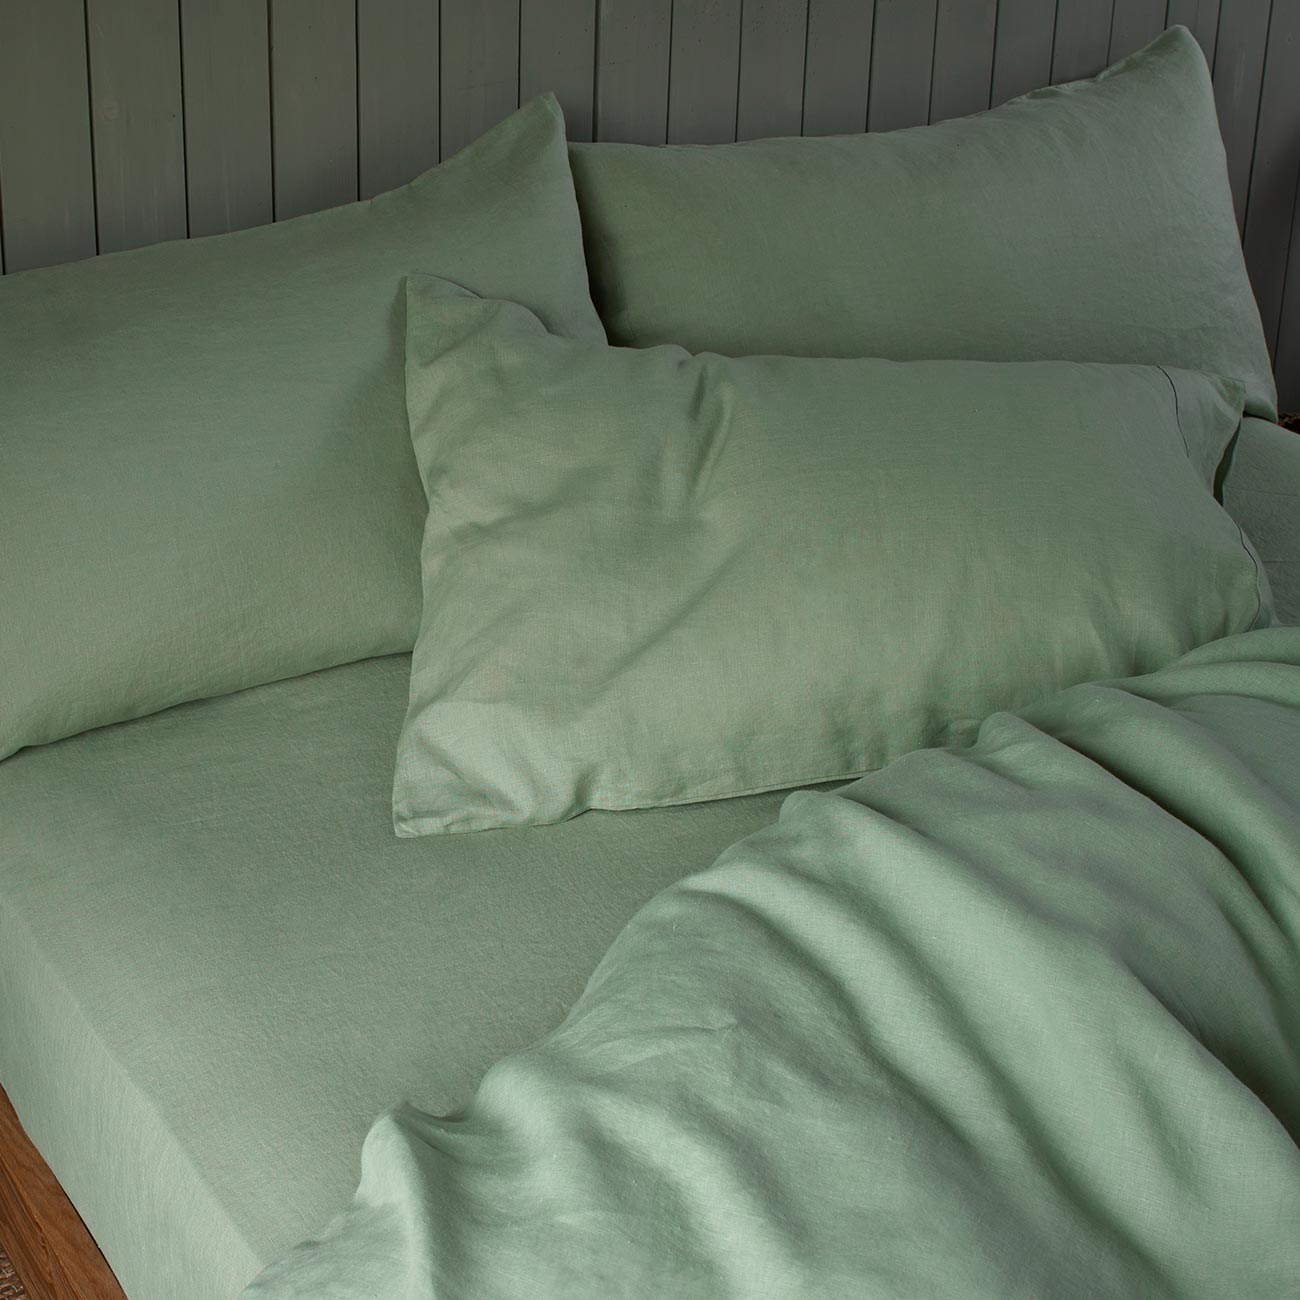 Sage Green Linen Fitted Sheet - Piglet in Bed US